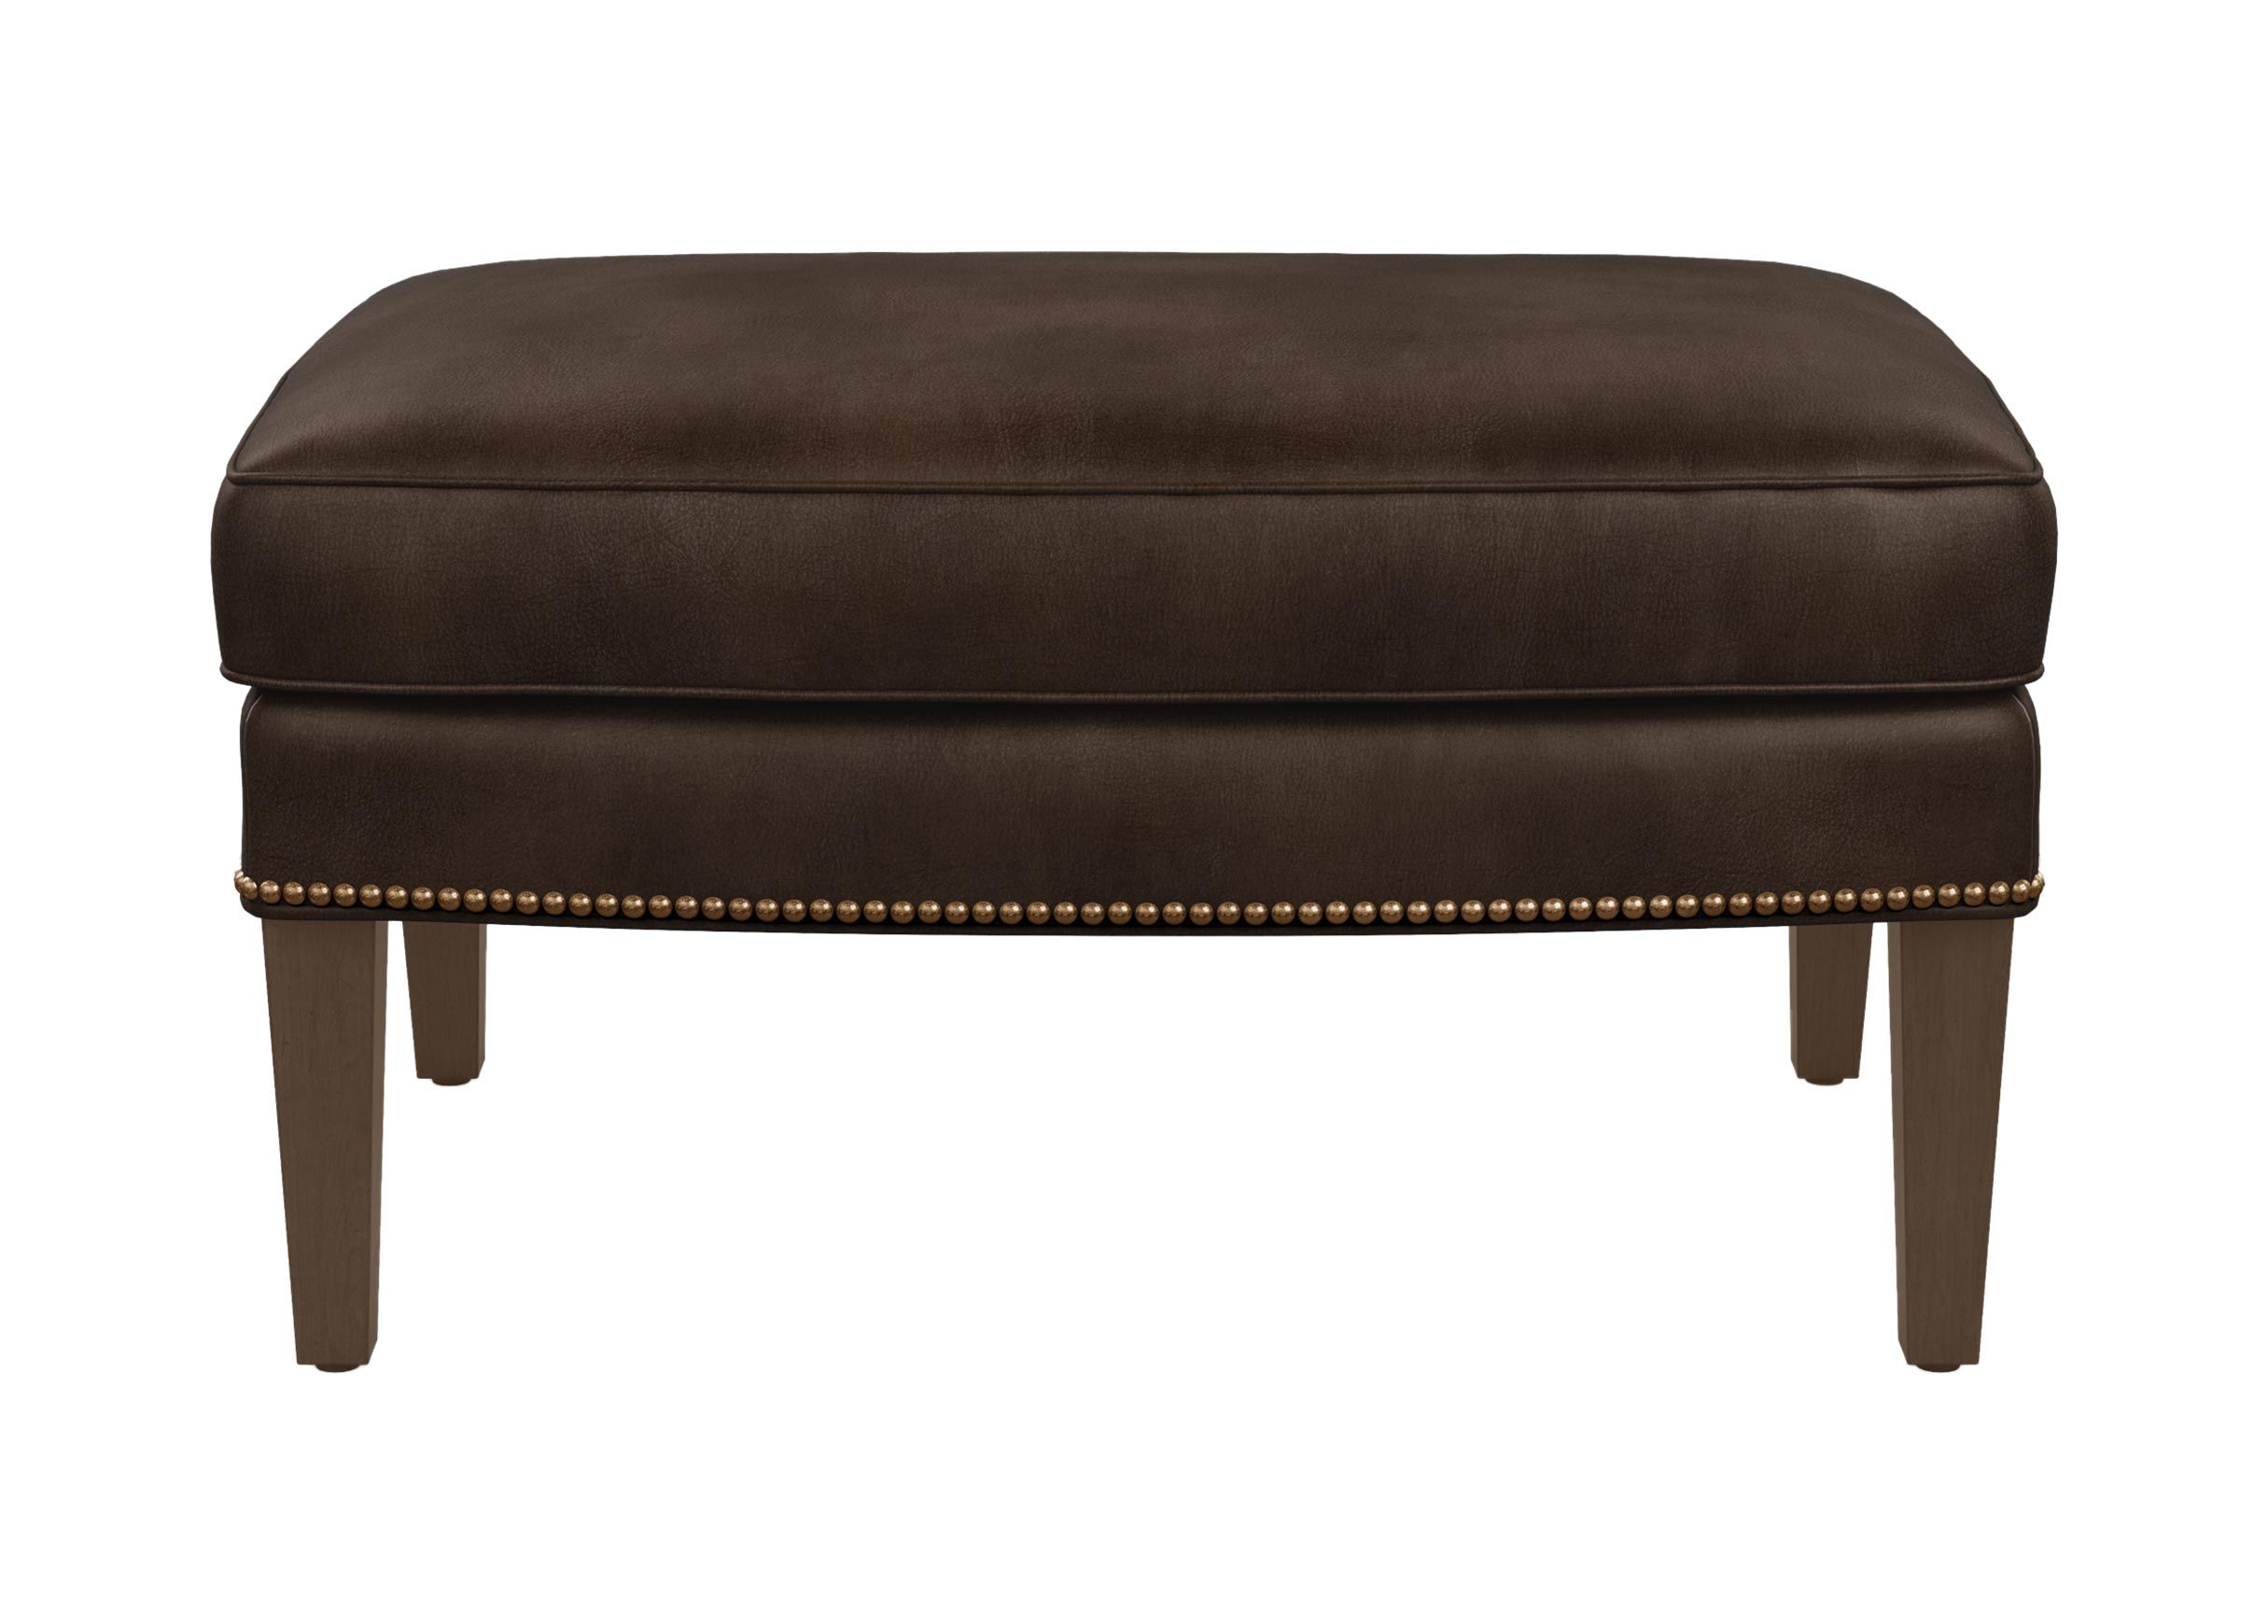 Rhodes Leather Ottoman | Ottomans & Benches | Ethan Allen Pertaining To Leather Pouf Ottomans (View 15 of 20)